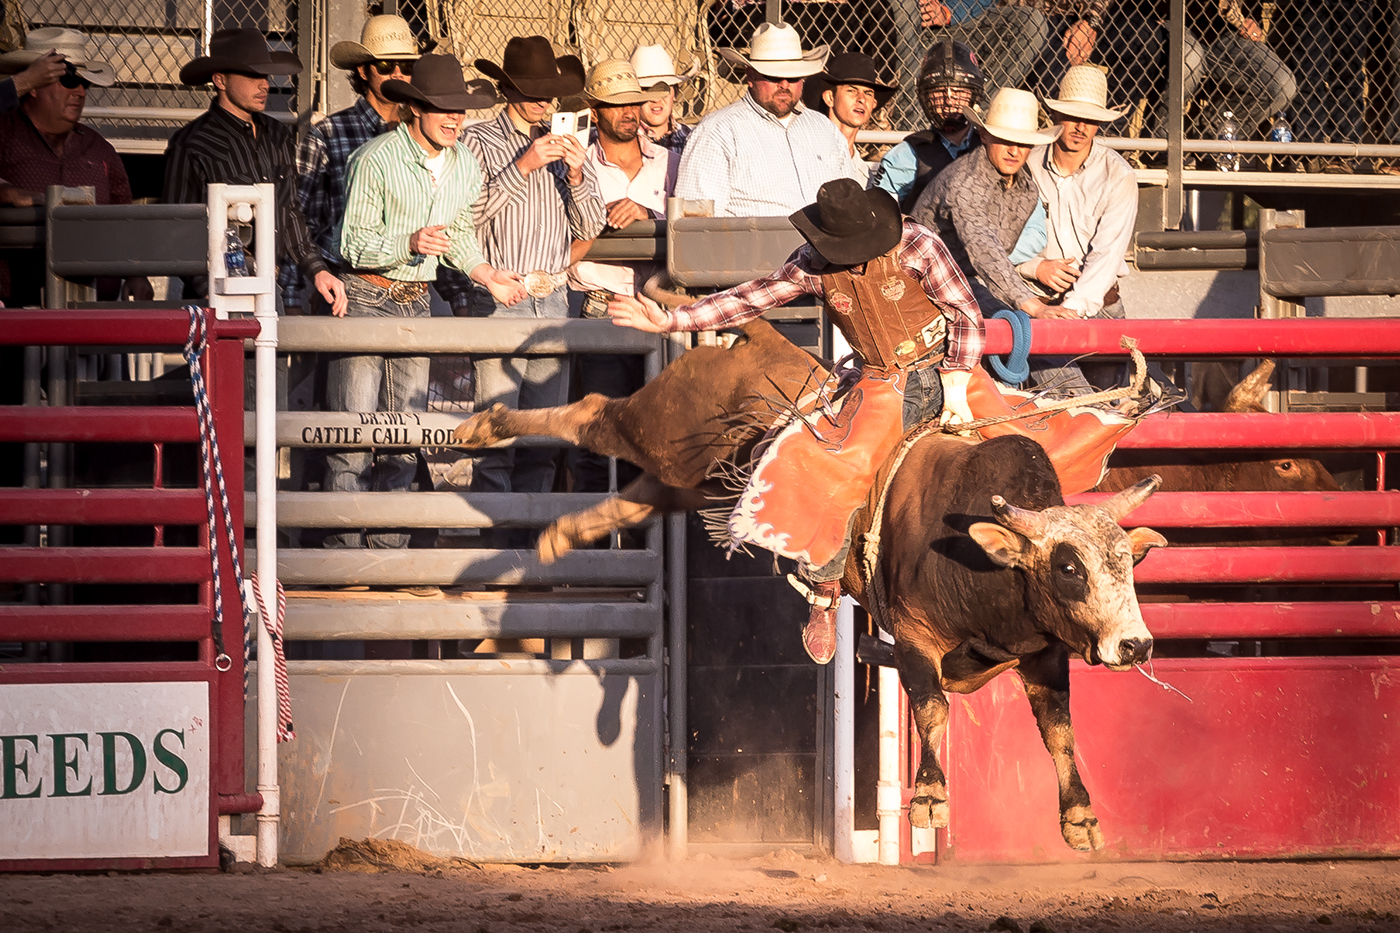 rodeo bull horses bullriding Competition farm country rural crowd animals Cattle equine California cowboy cowgirl